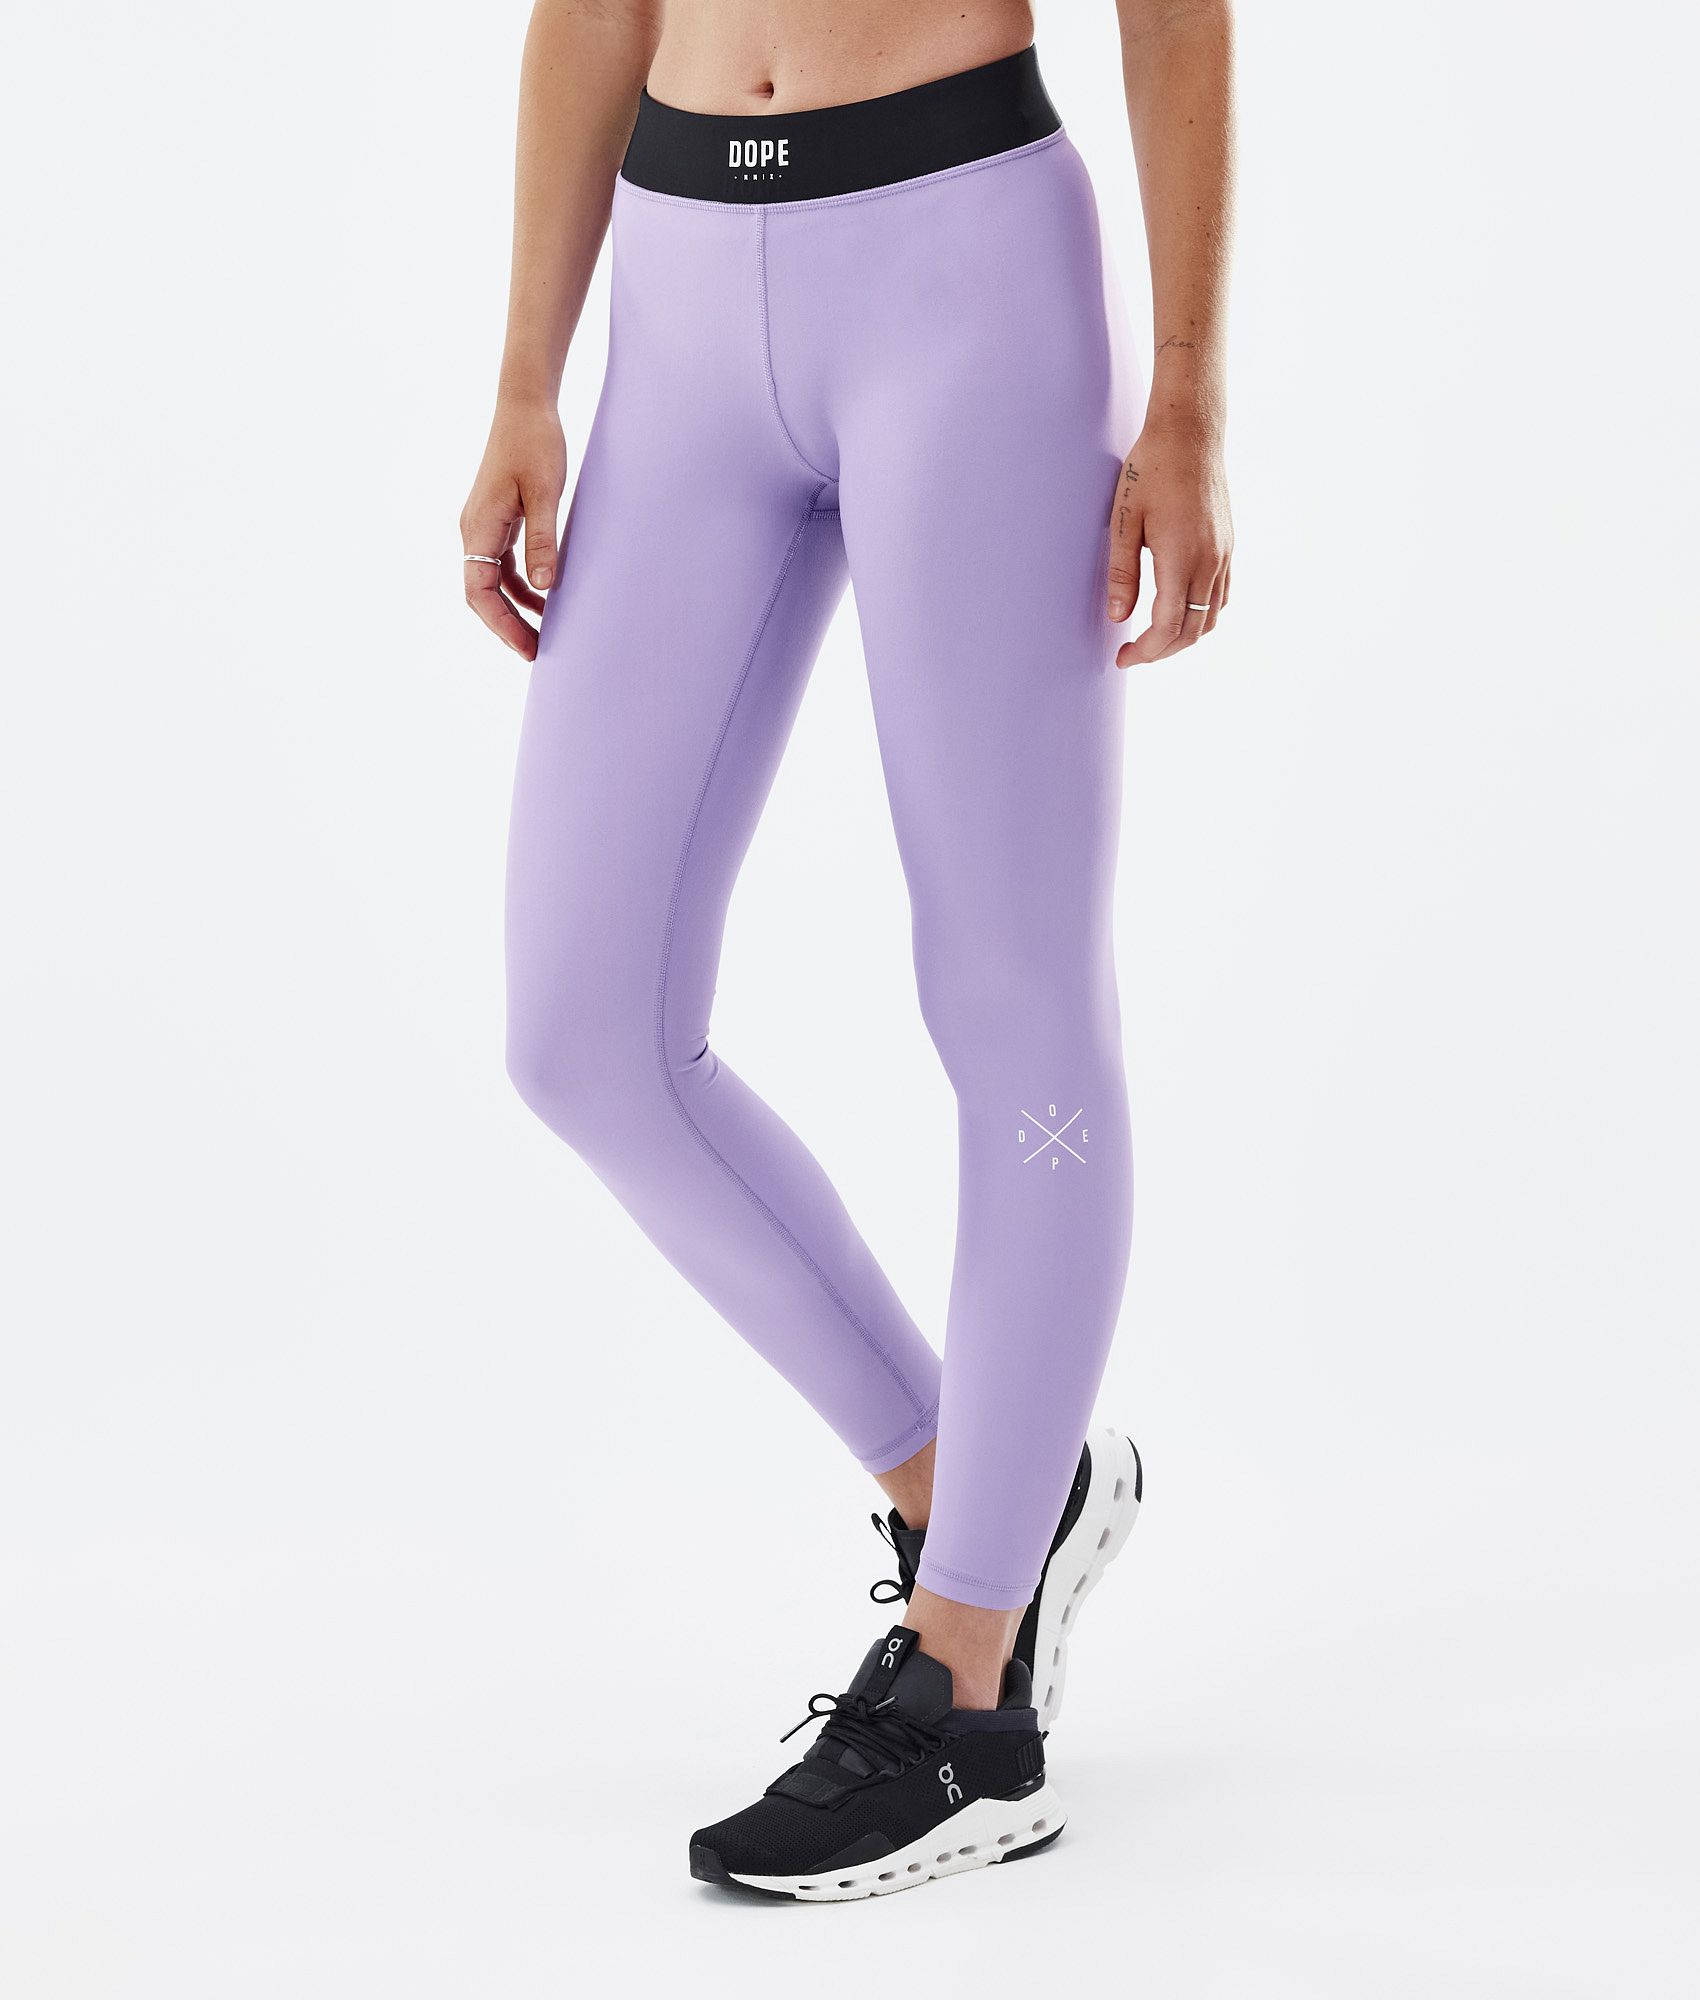 Frenchtrendz - Buy Cotton Spandex Ankle Leggings from Frenchtrendz. Go  visit our site. http://frenchtrendz.com/frenchtrendz-cotton-spandex-light- purple-ankle-legging #clothing #clothingbrand #frenchtrendz  #frenchtrendzlovers #trending #capri #spandex ...